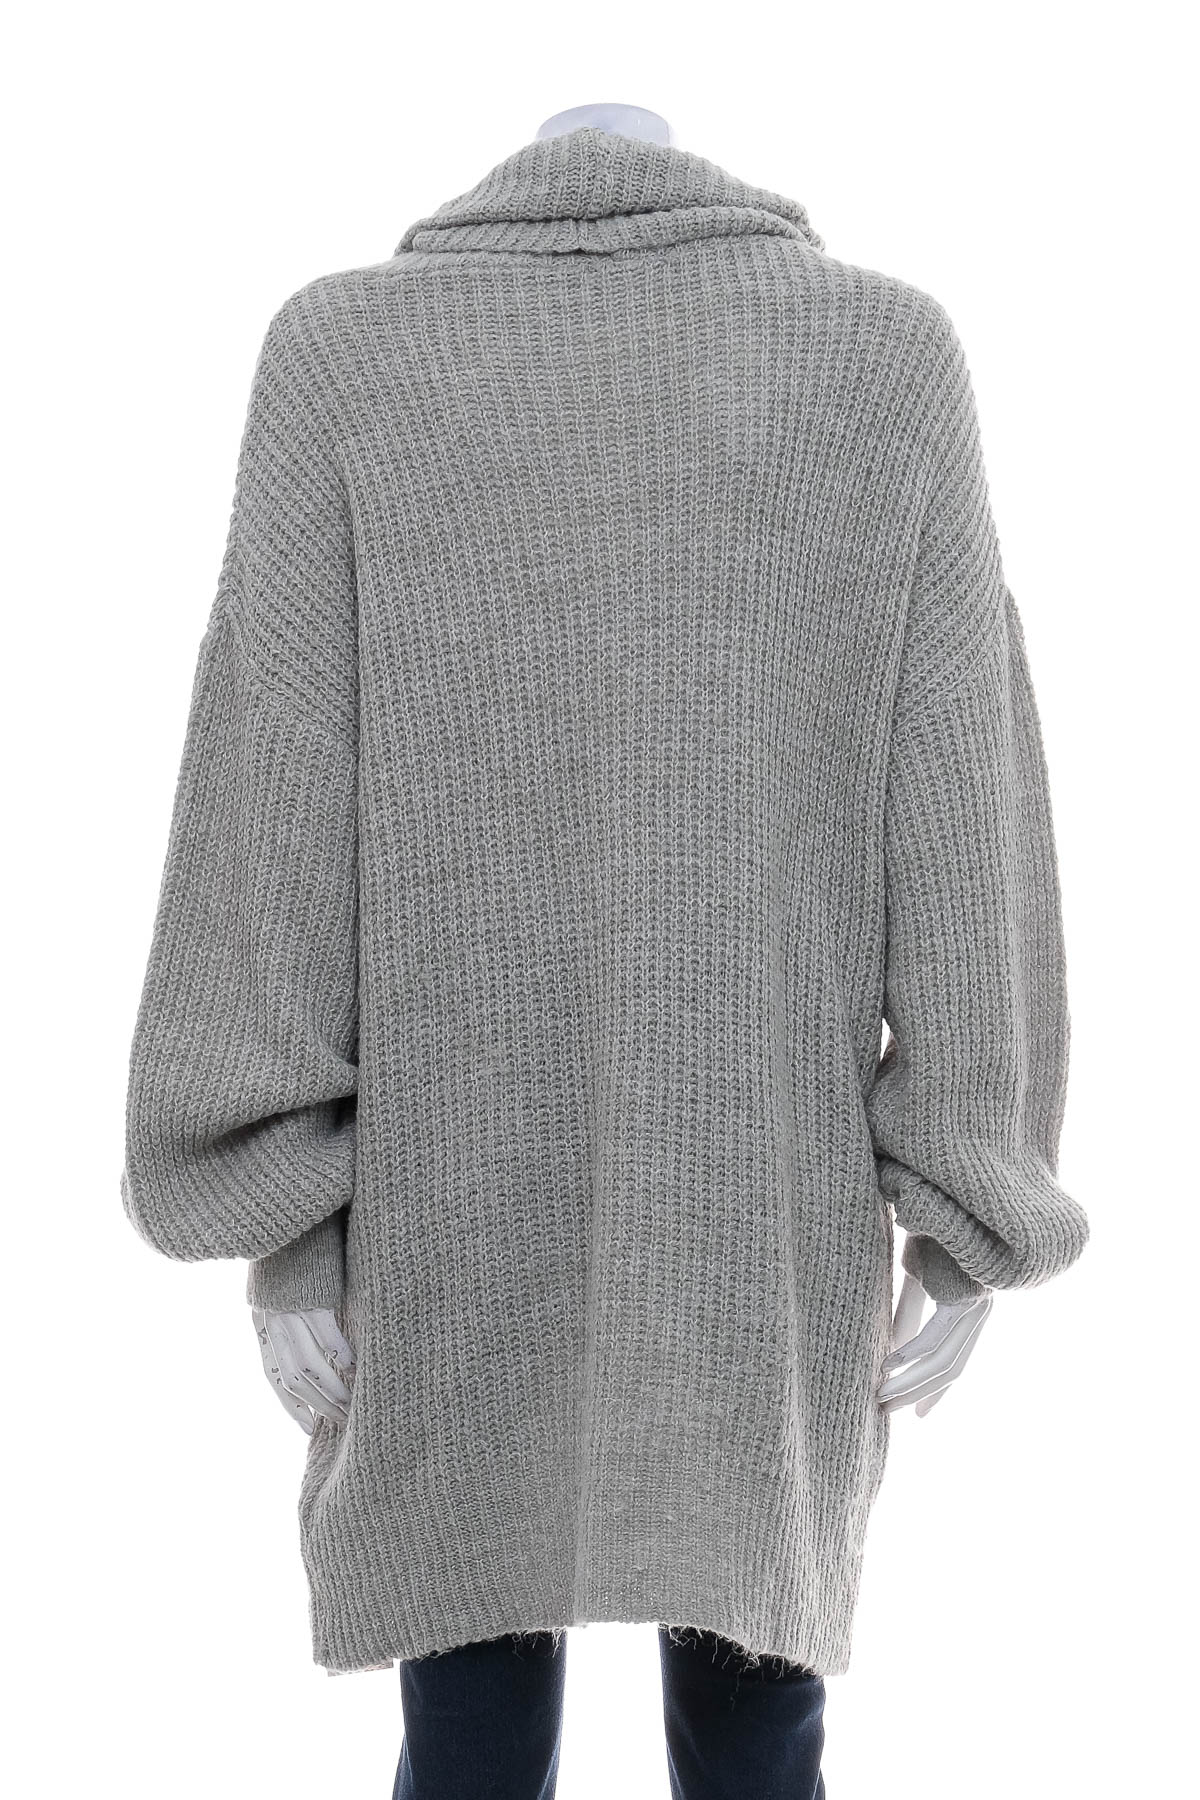 Women's sweater - LeGer by LENA GERCKE for ABOUT YOU - 1